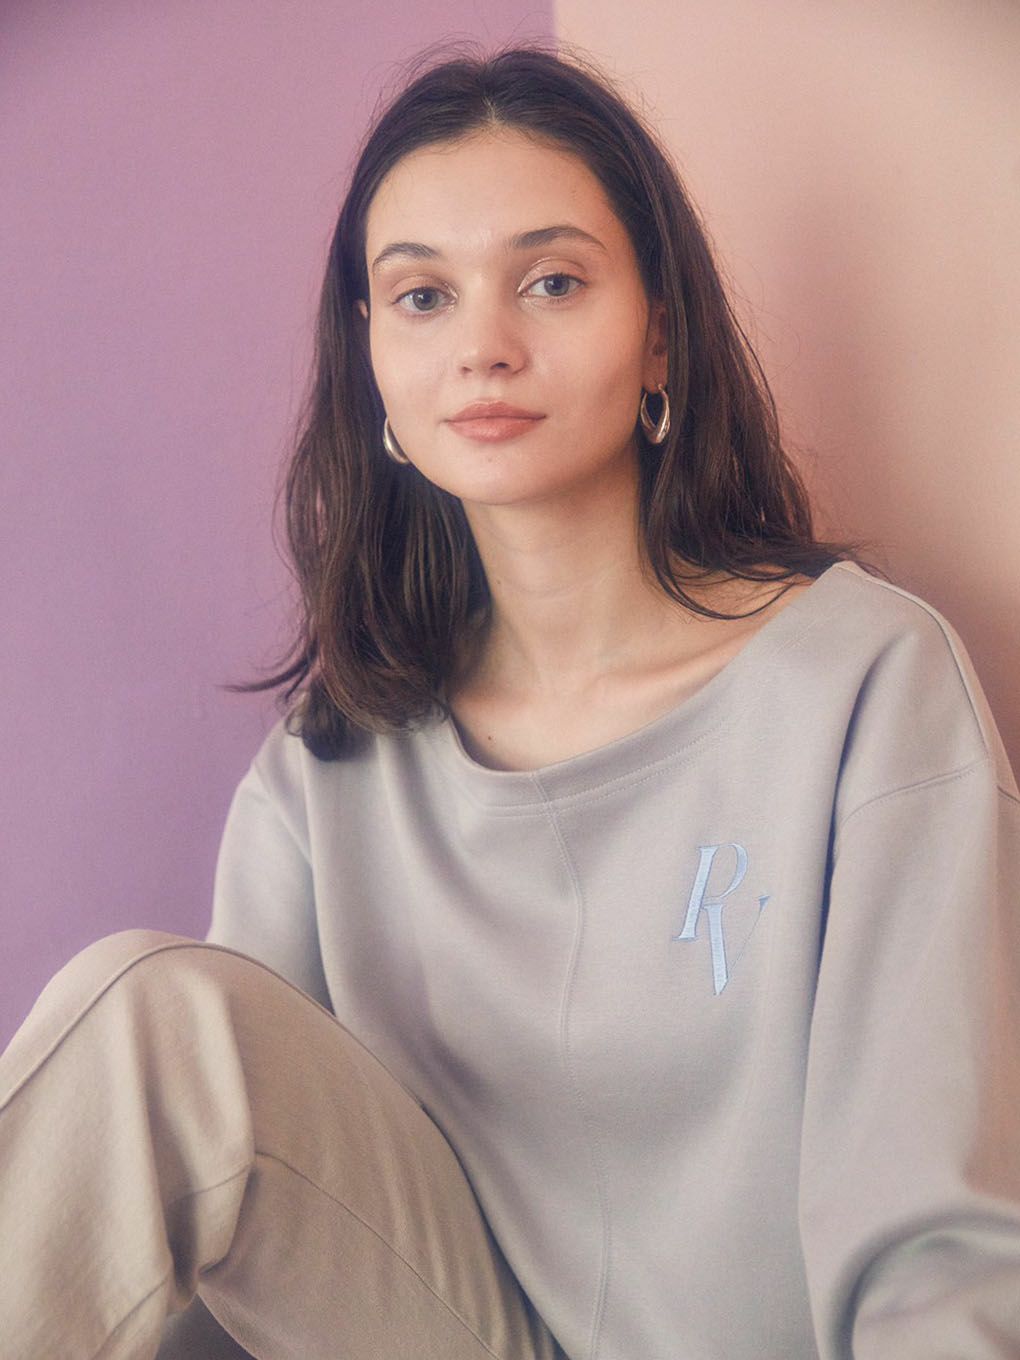 THE PV LOGO EMBROIDERY BOAT NECK TOPS